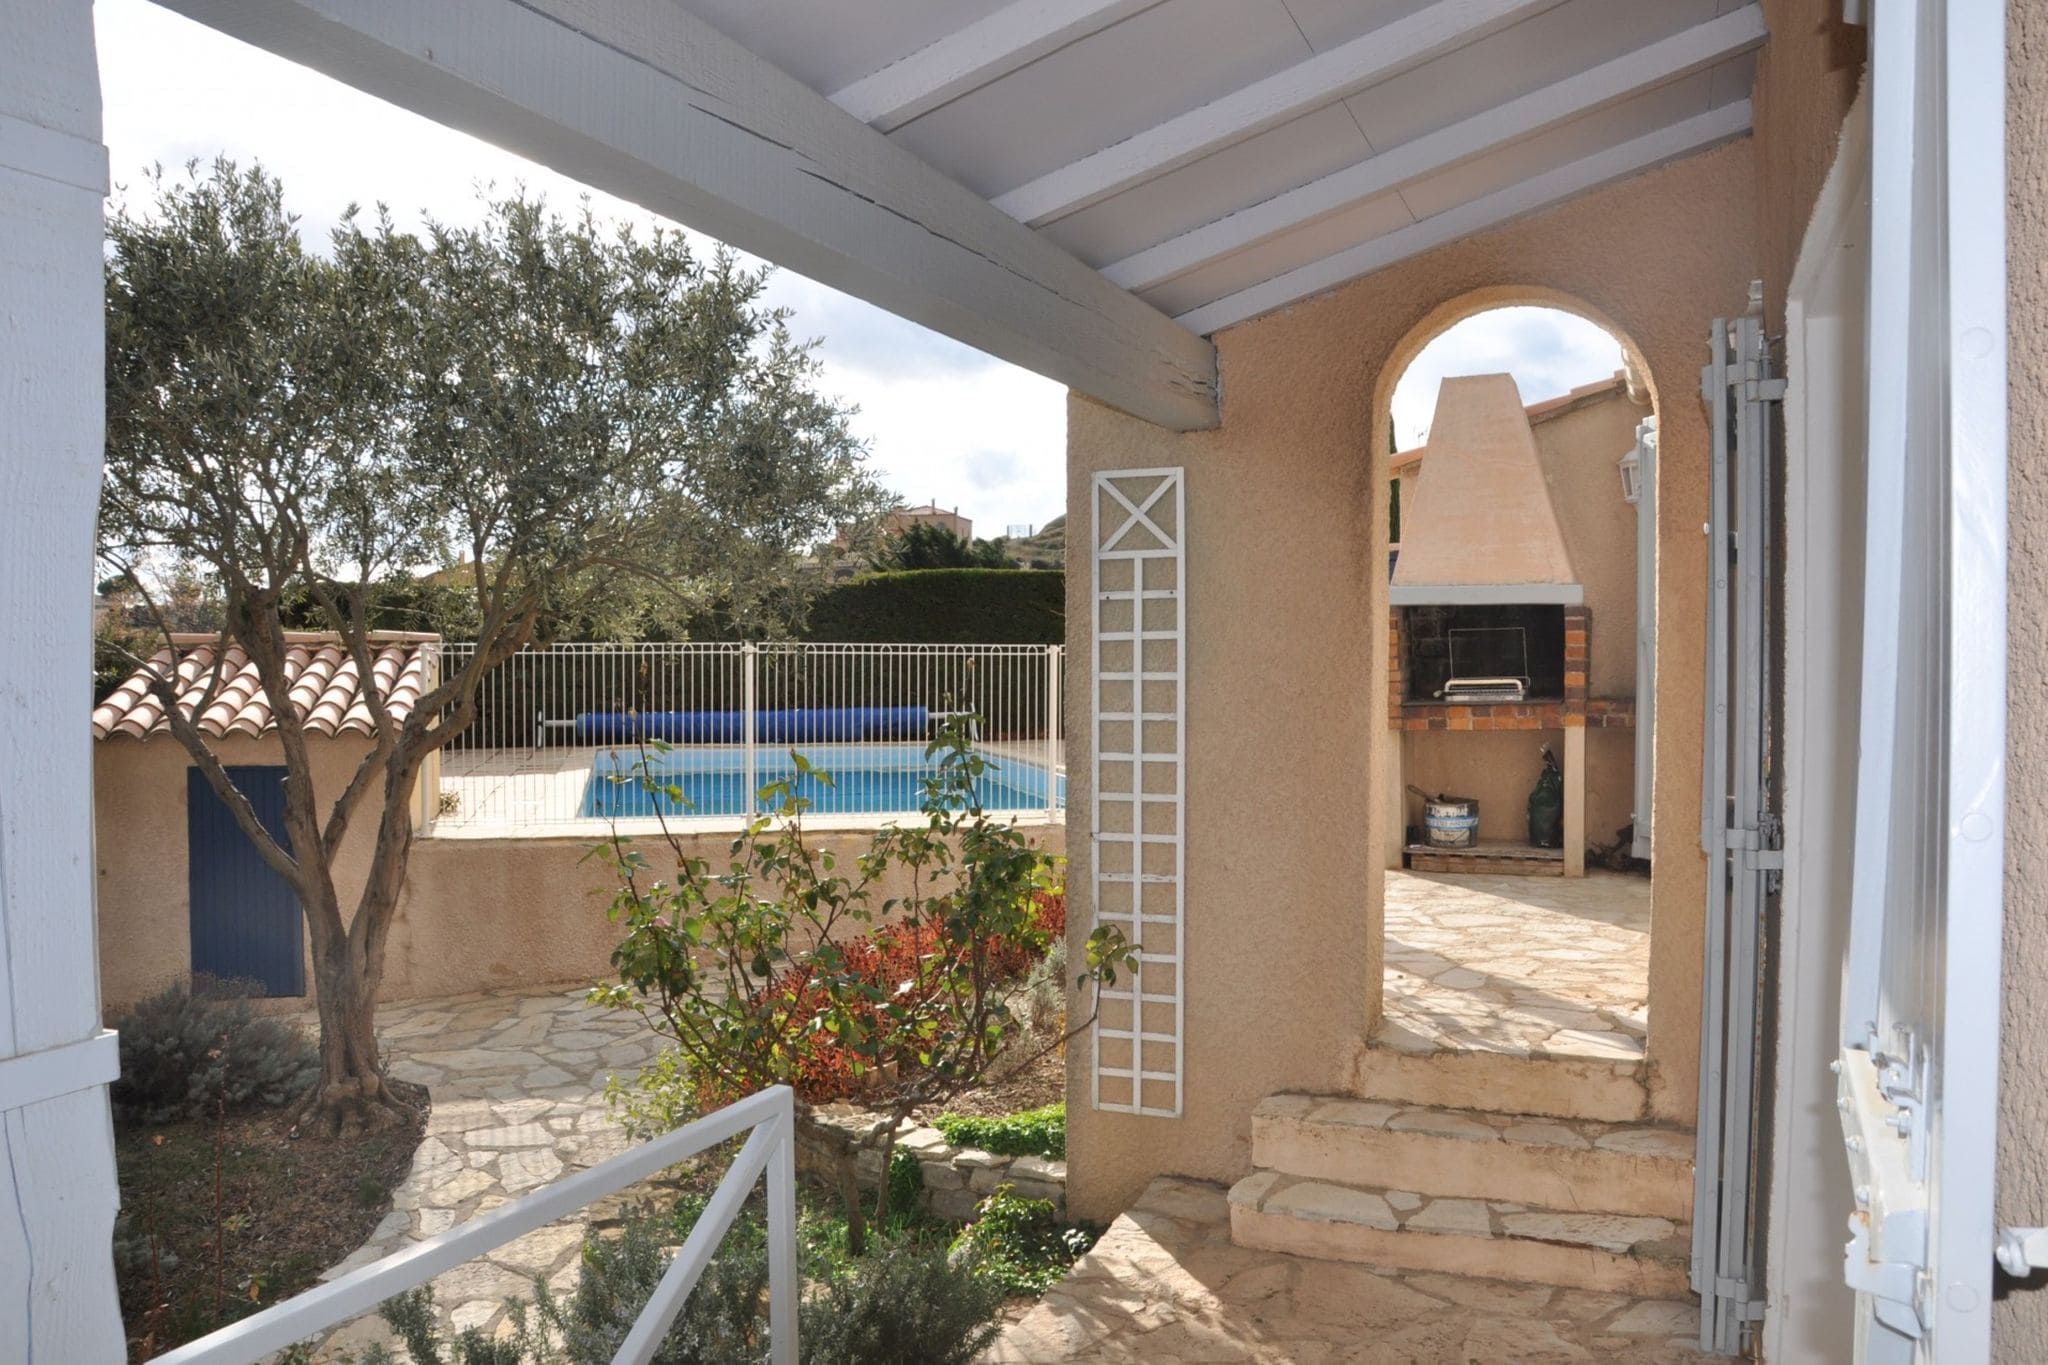 Holiday villa near Narbonne-Plage, fenced private swimming pool and view of a lake